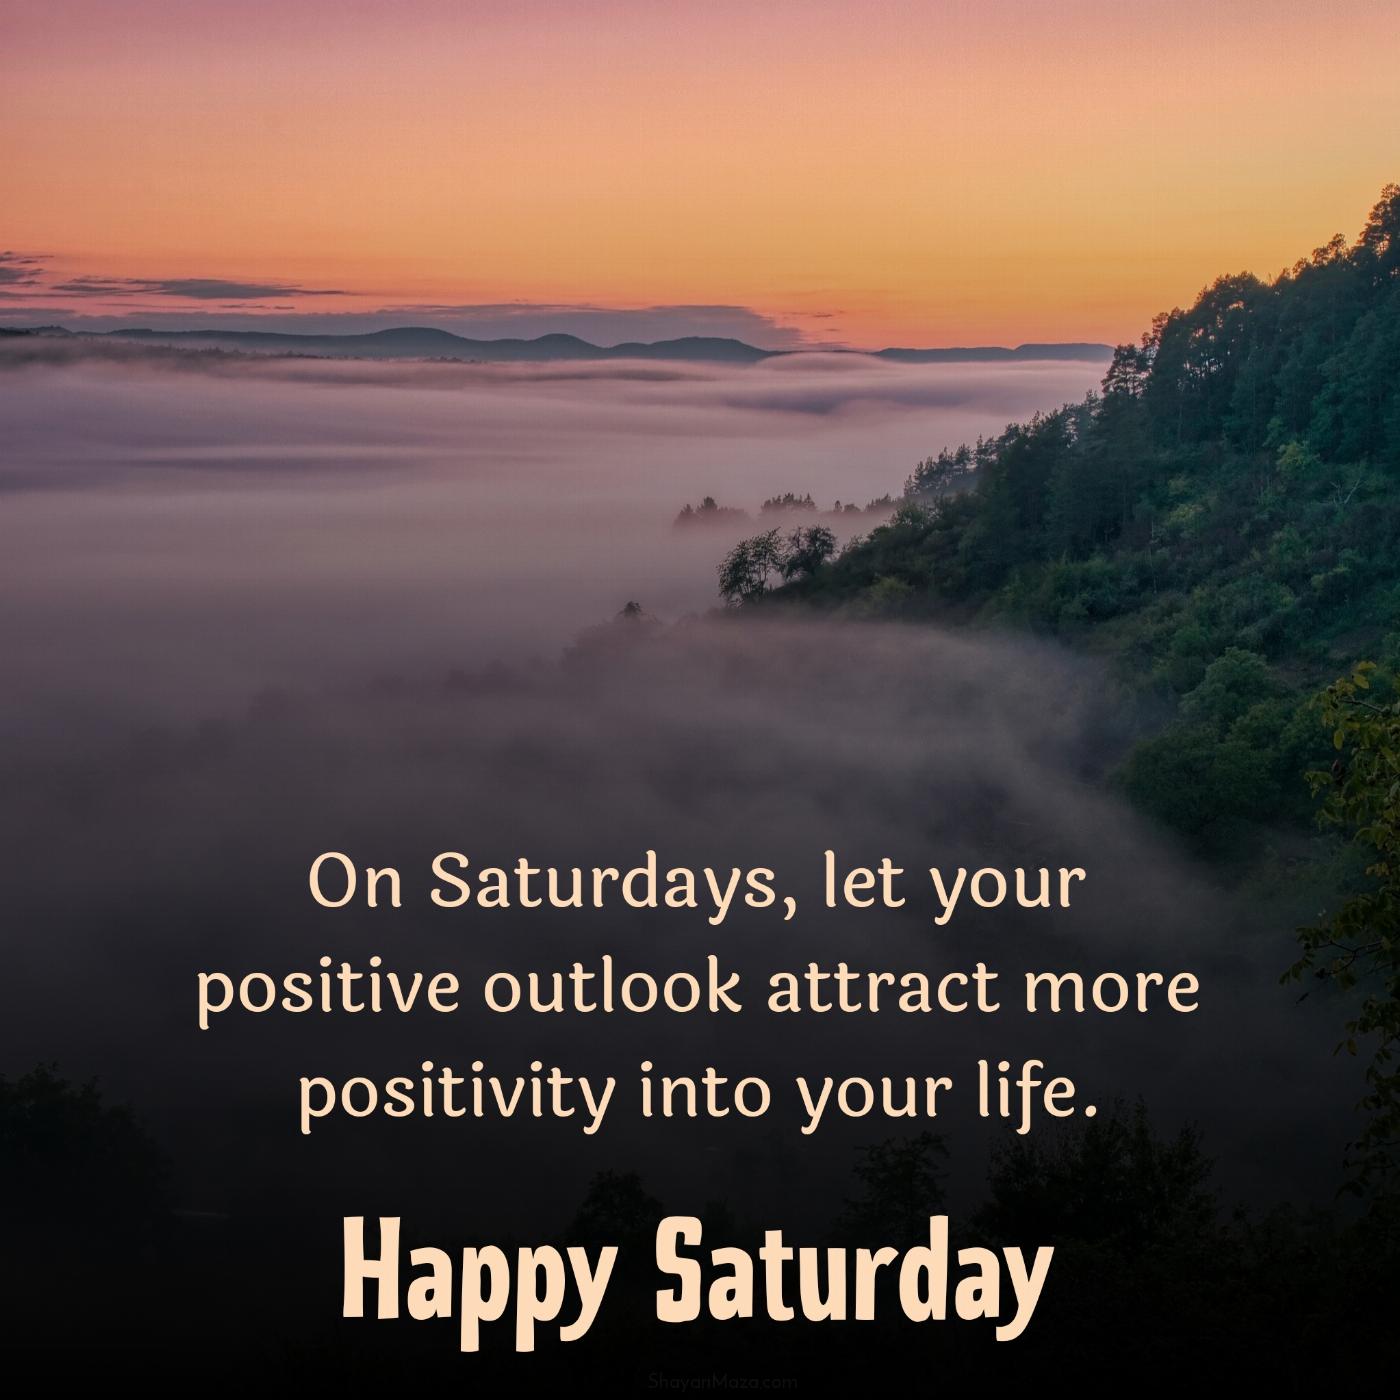 On Saturdays let your positive outlook attract more positivity